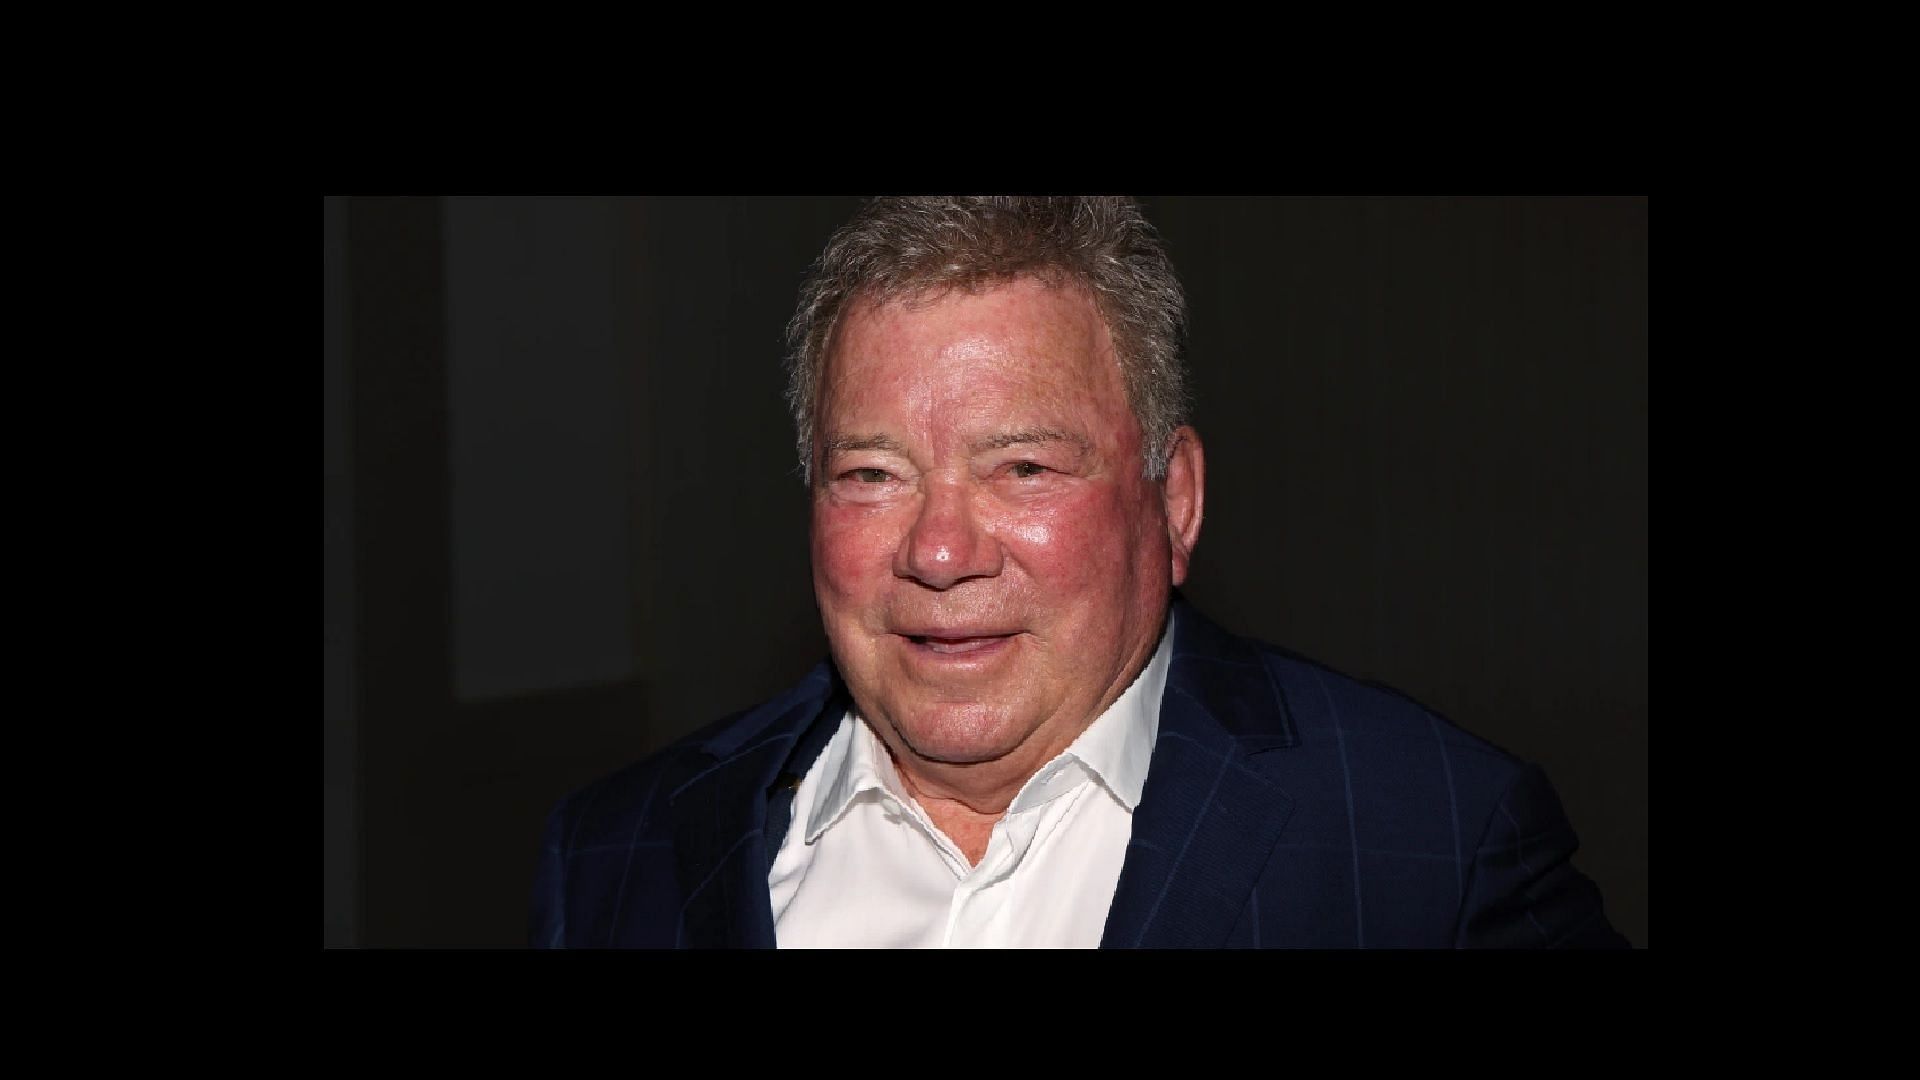 William Shatner says he doesn